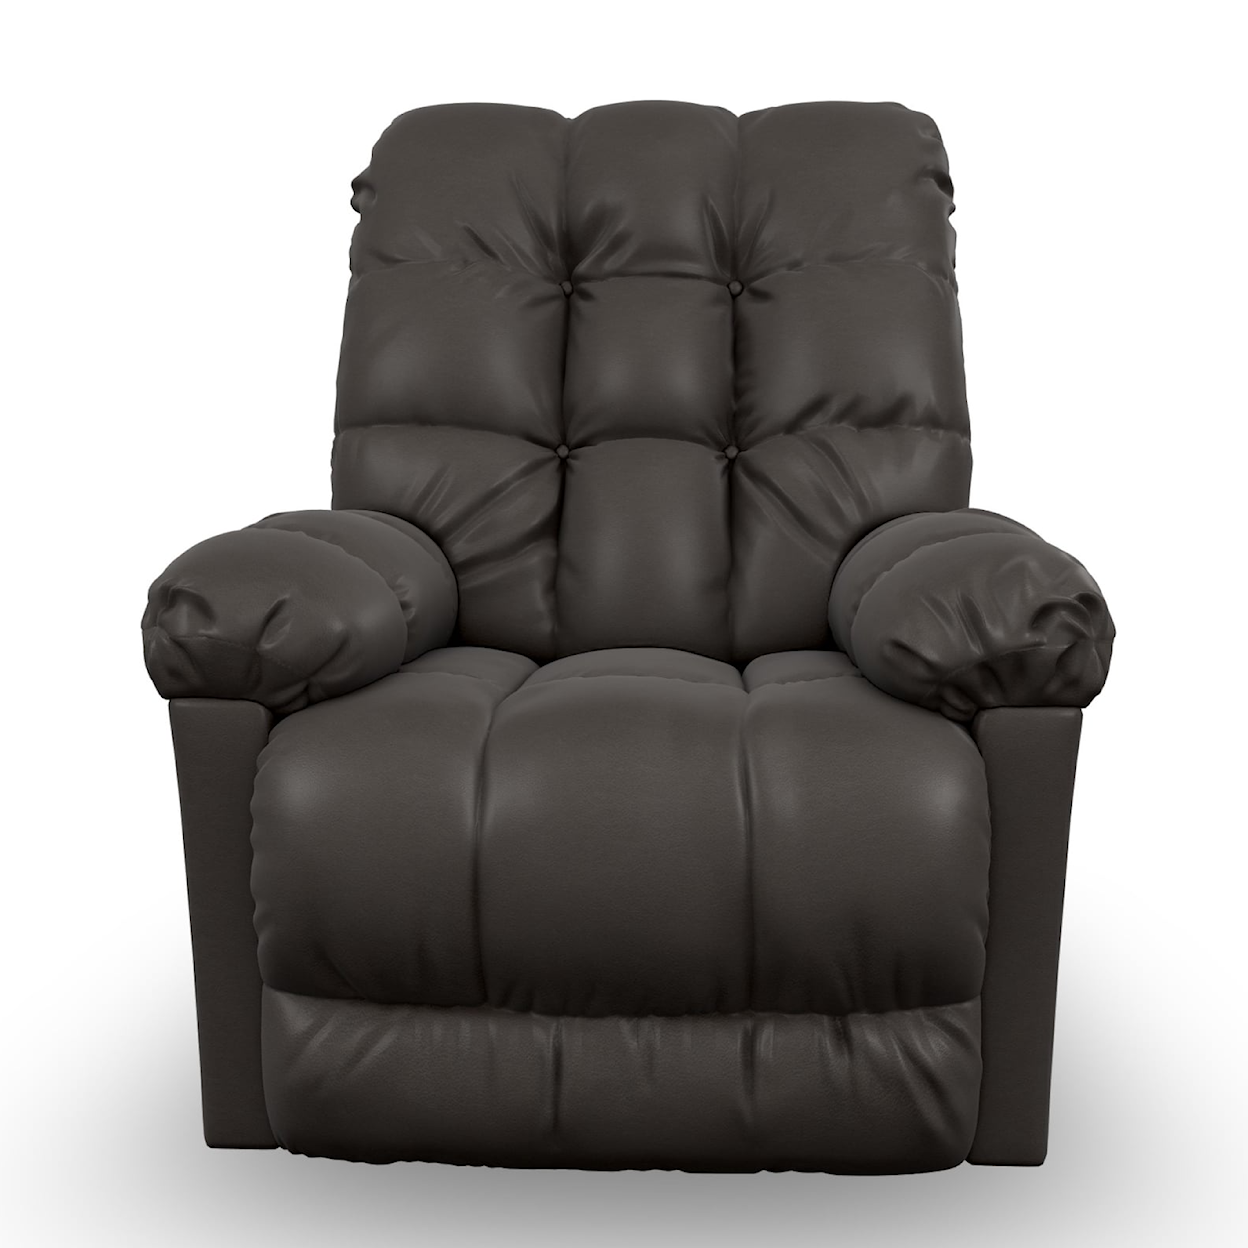 Best Home Furnishings Perkins Power Rocking Recliner with Heat & Massage